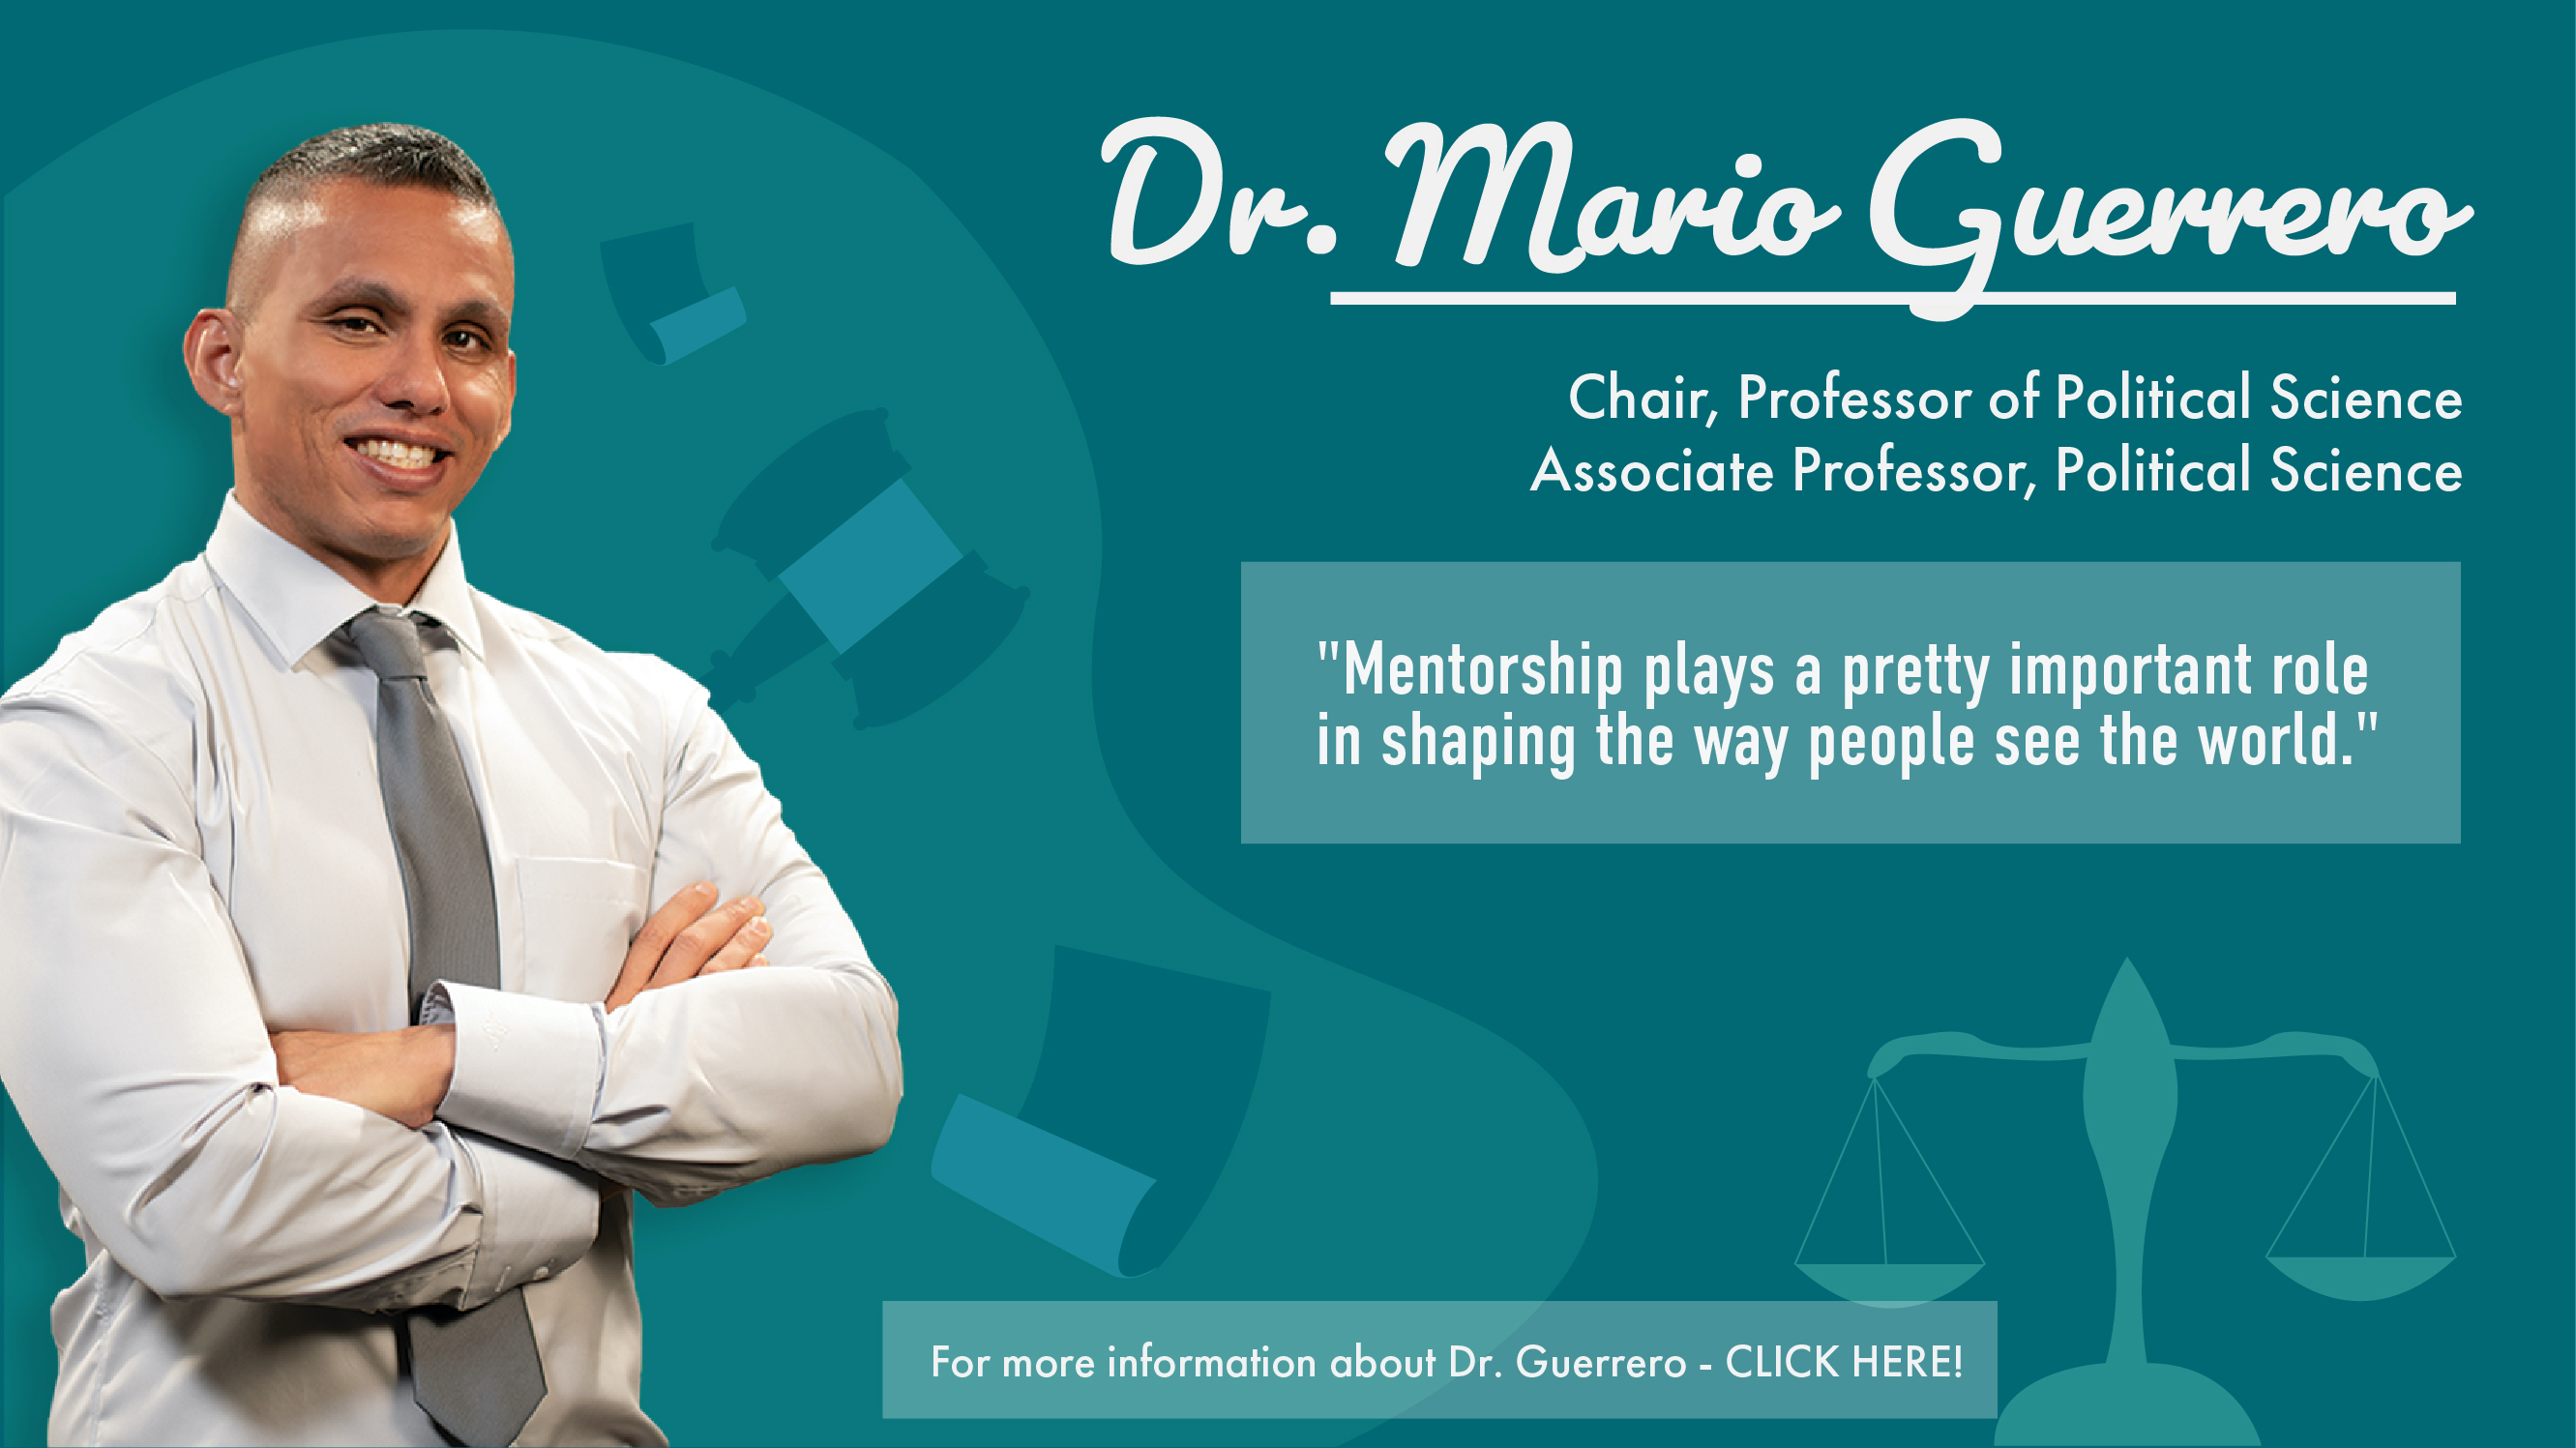 Cut out of man crossing his arms and smiling at camera on a teal background and text that has his name: Dr. Mario Guerrero and his respective title: Chair, Professor of Political Science, Associate Professor, Political Science